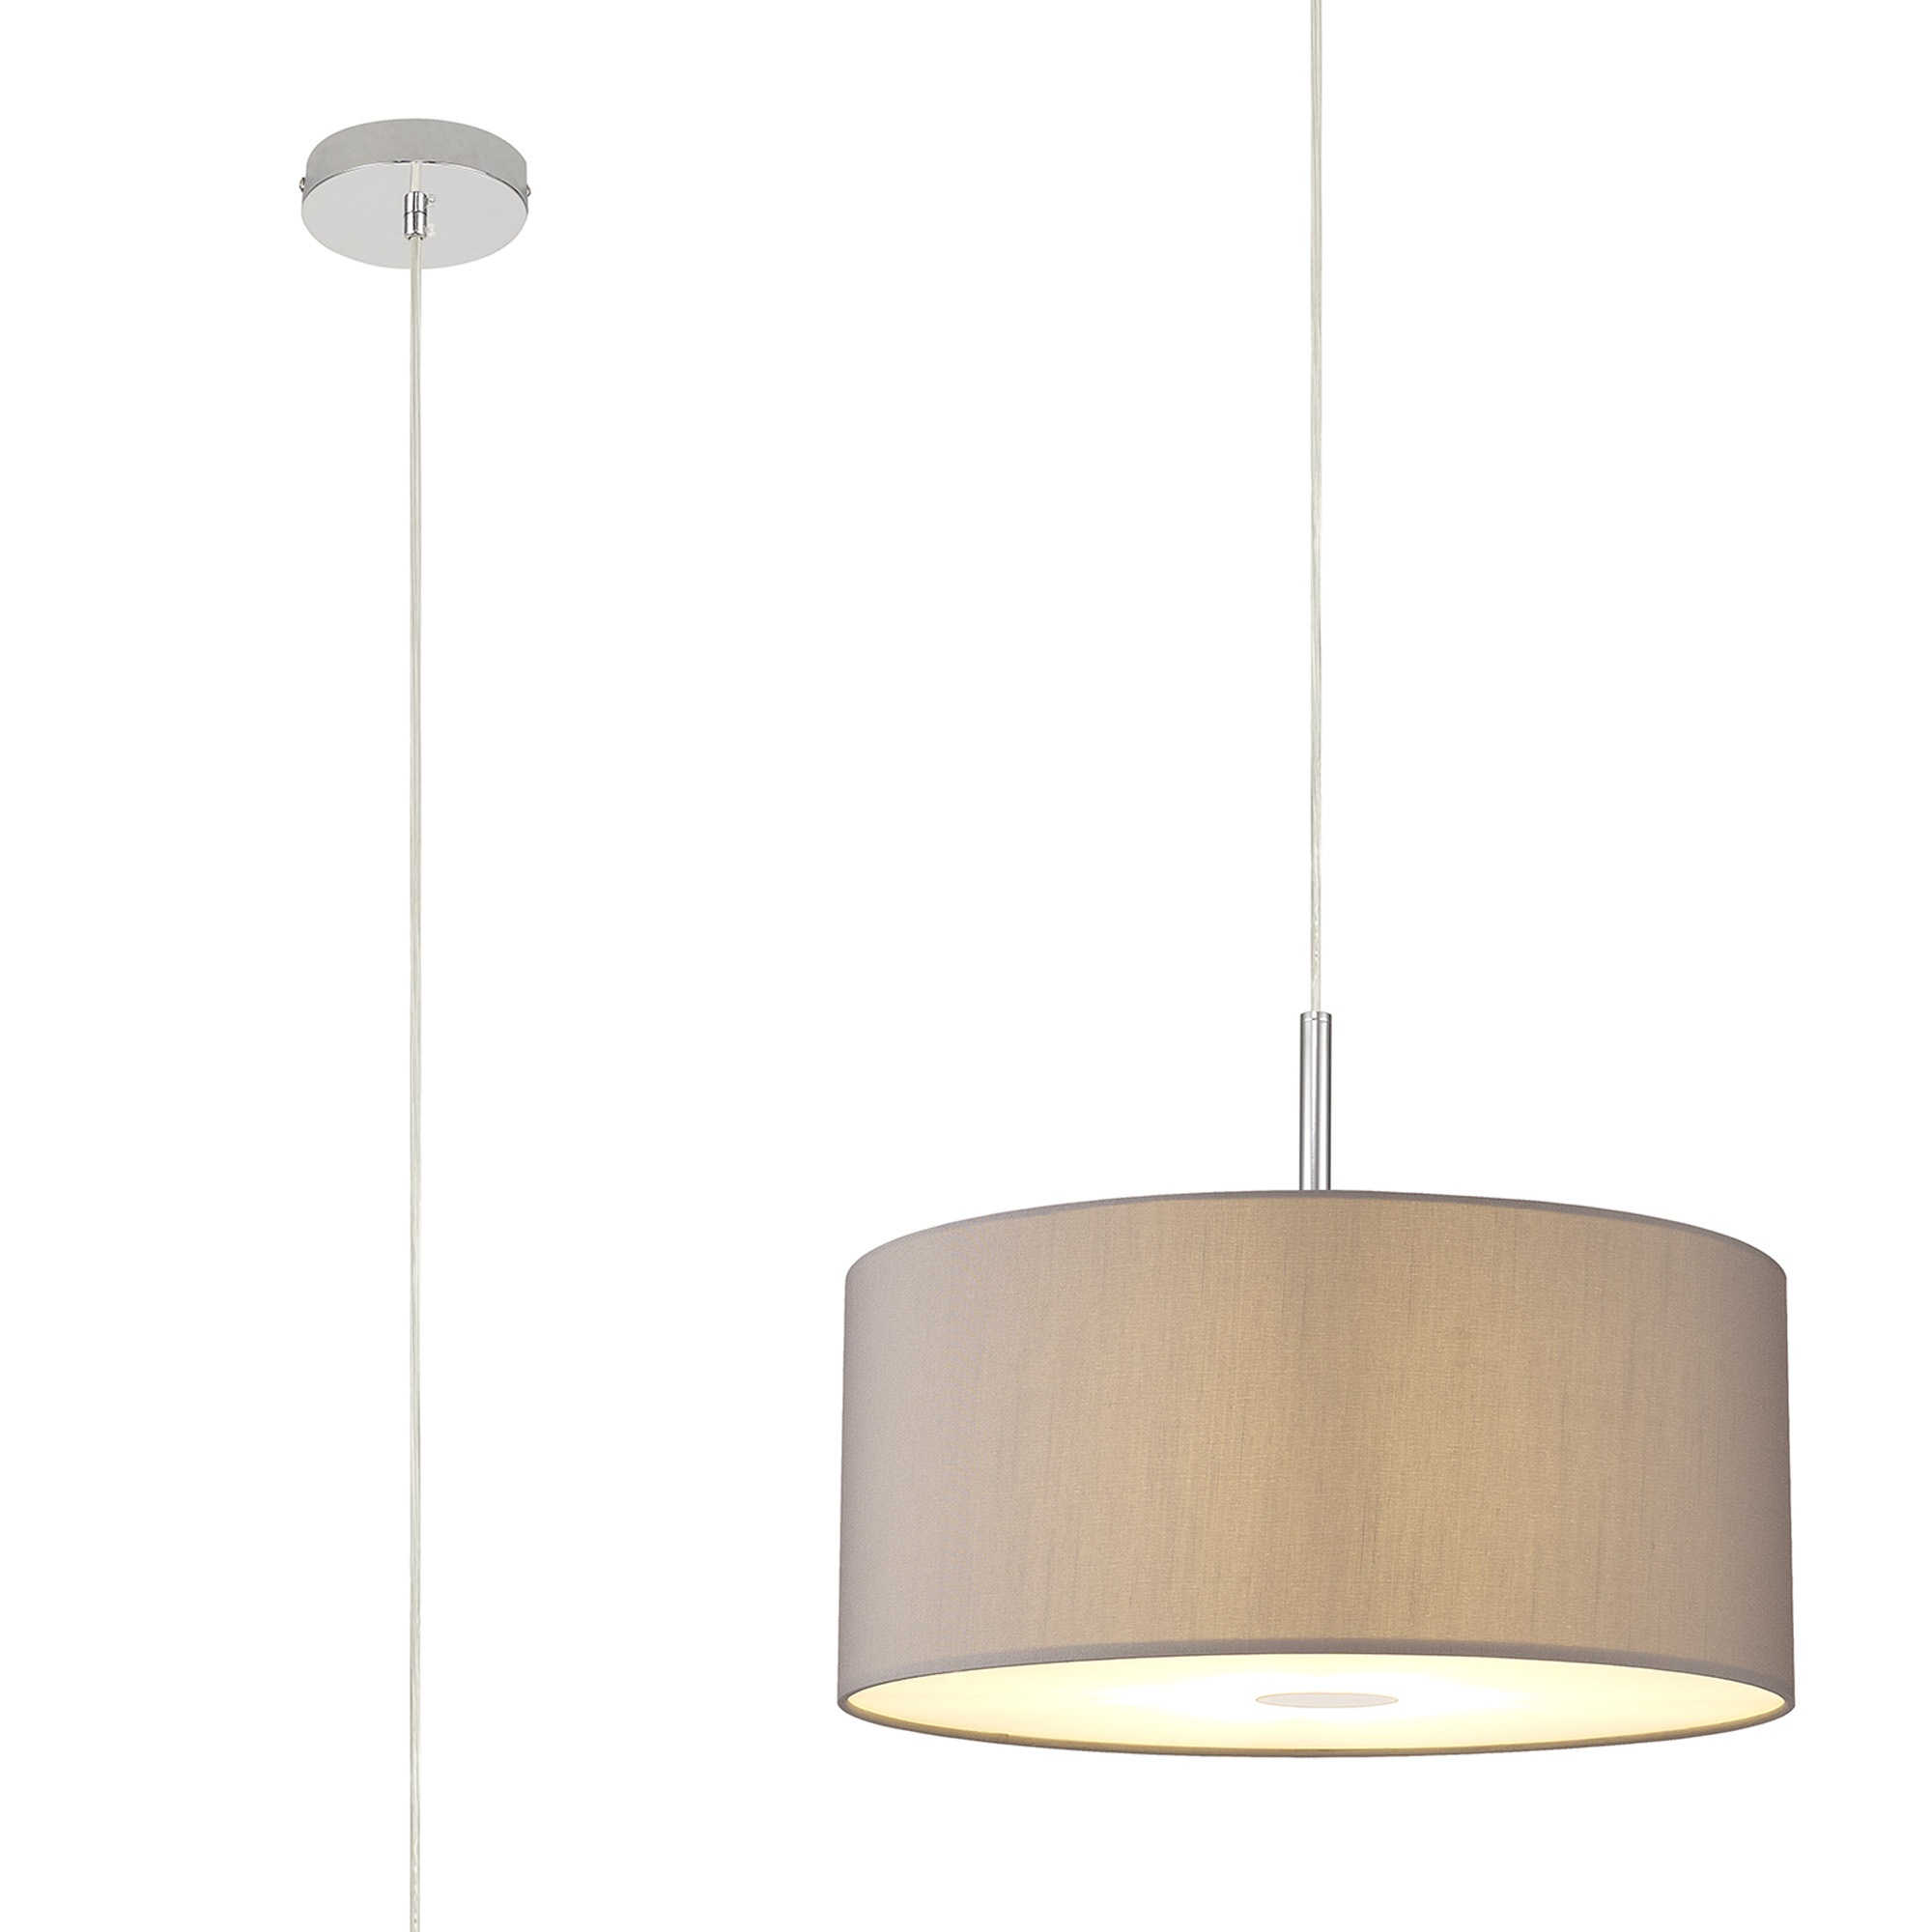 DK0142  Baymont 40cm Pendant 1 Light Polished Chrome, Grey, Frosted Diffuser